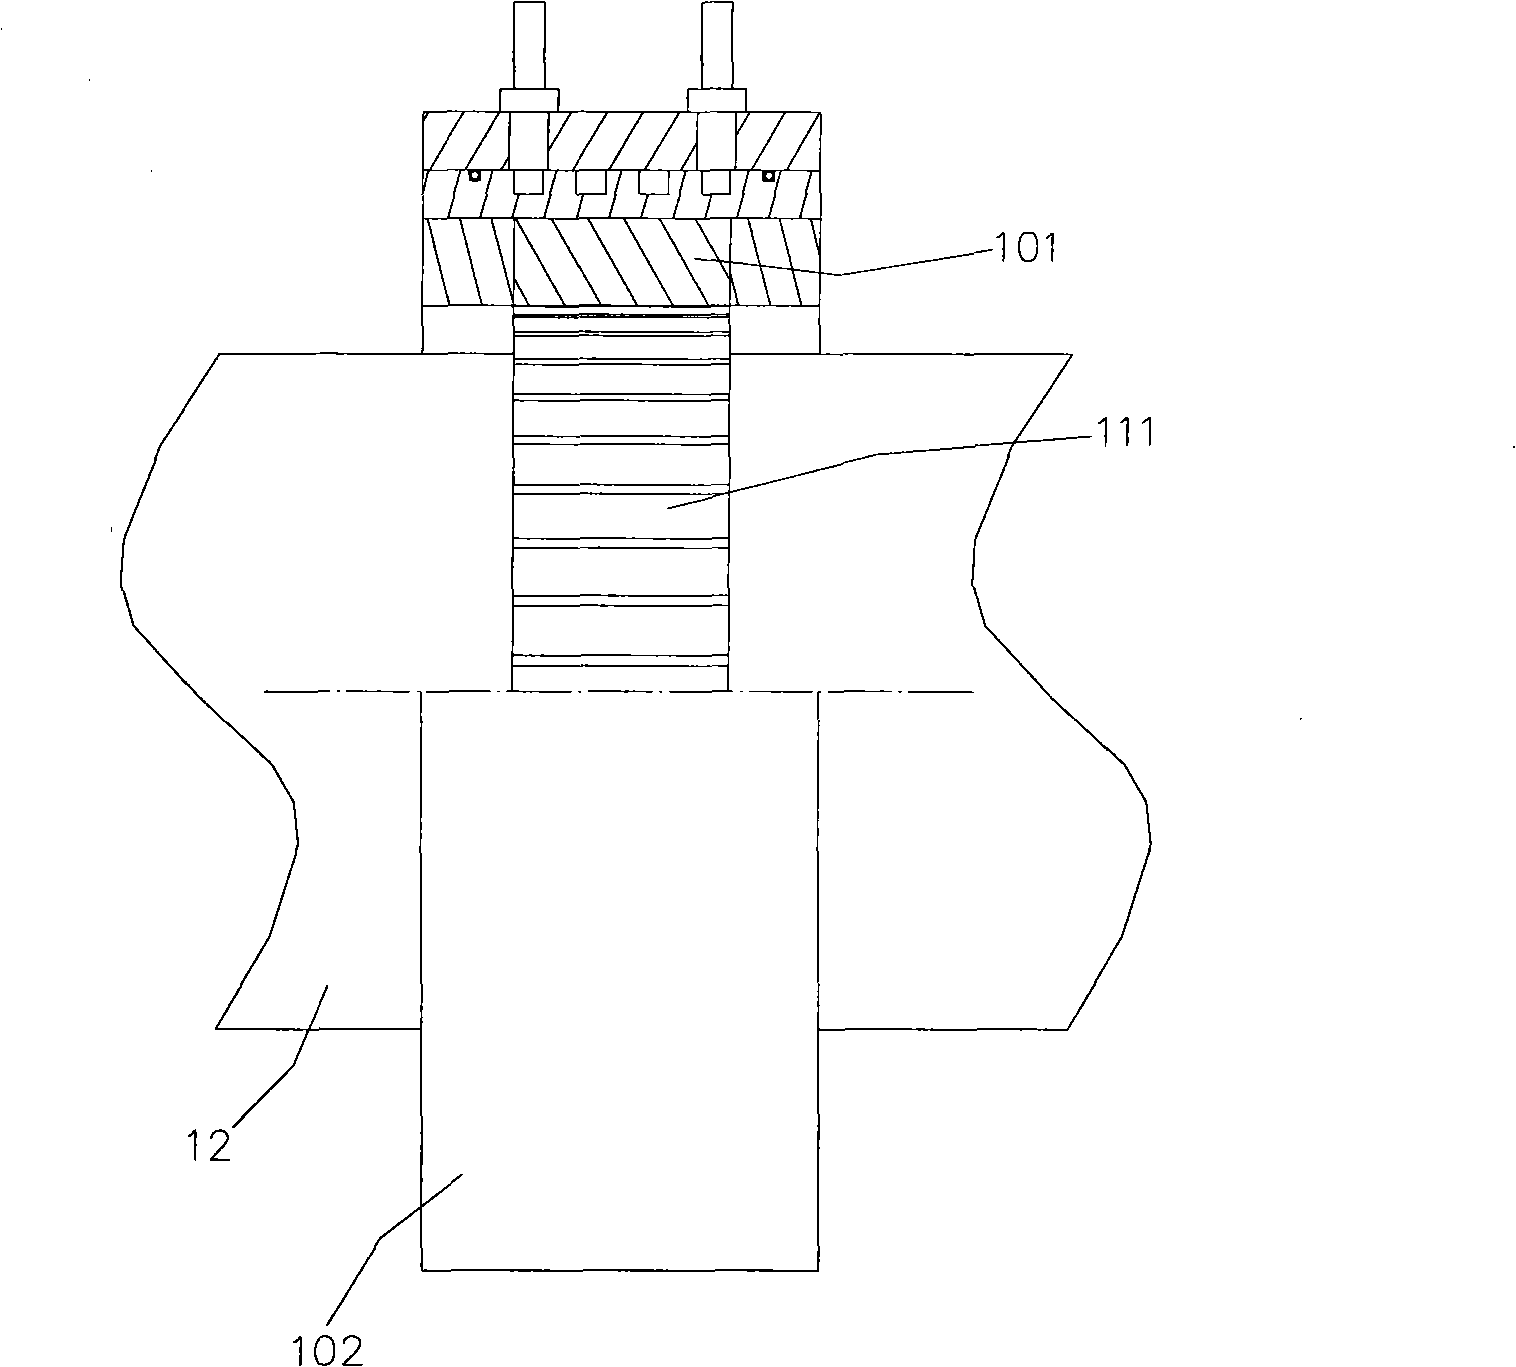 Main shaft remaining gap eliminating construction for direct driving rotary distance motor apparatus